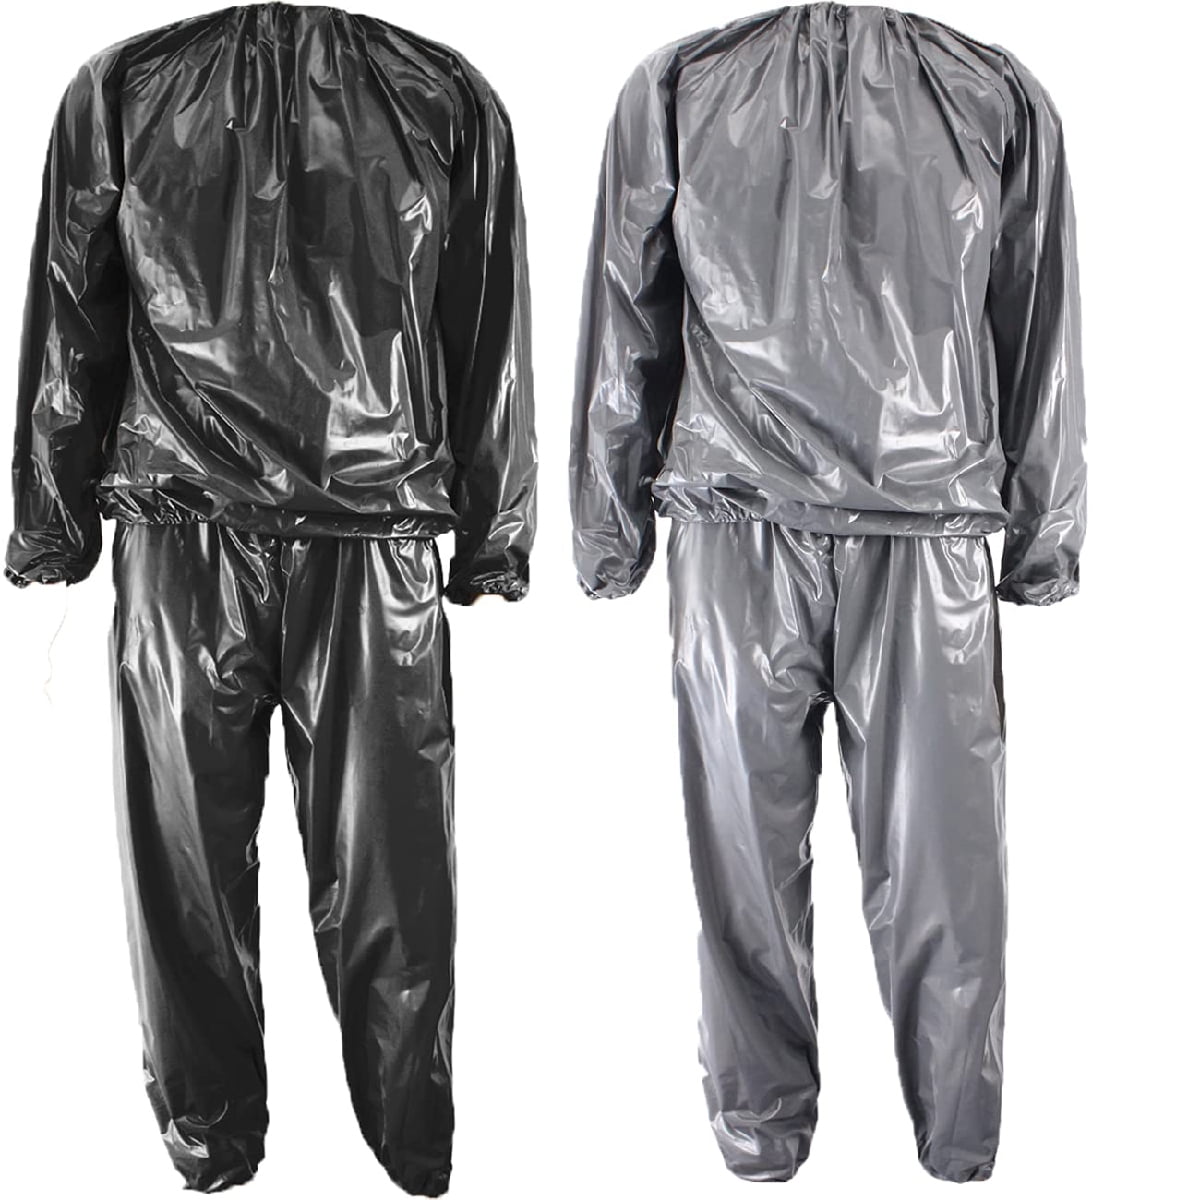 Heavy Duty Sweat Suit Sauna Exercise Gym Fitness Weight Loss Anti-Rip L-4XL US 